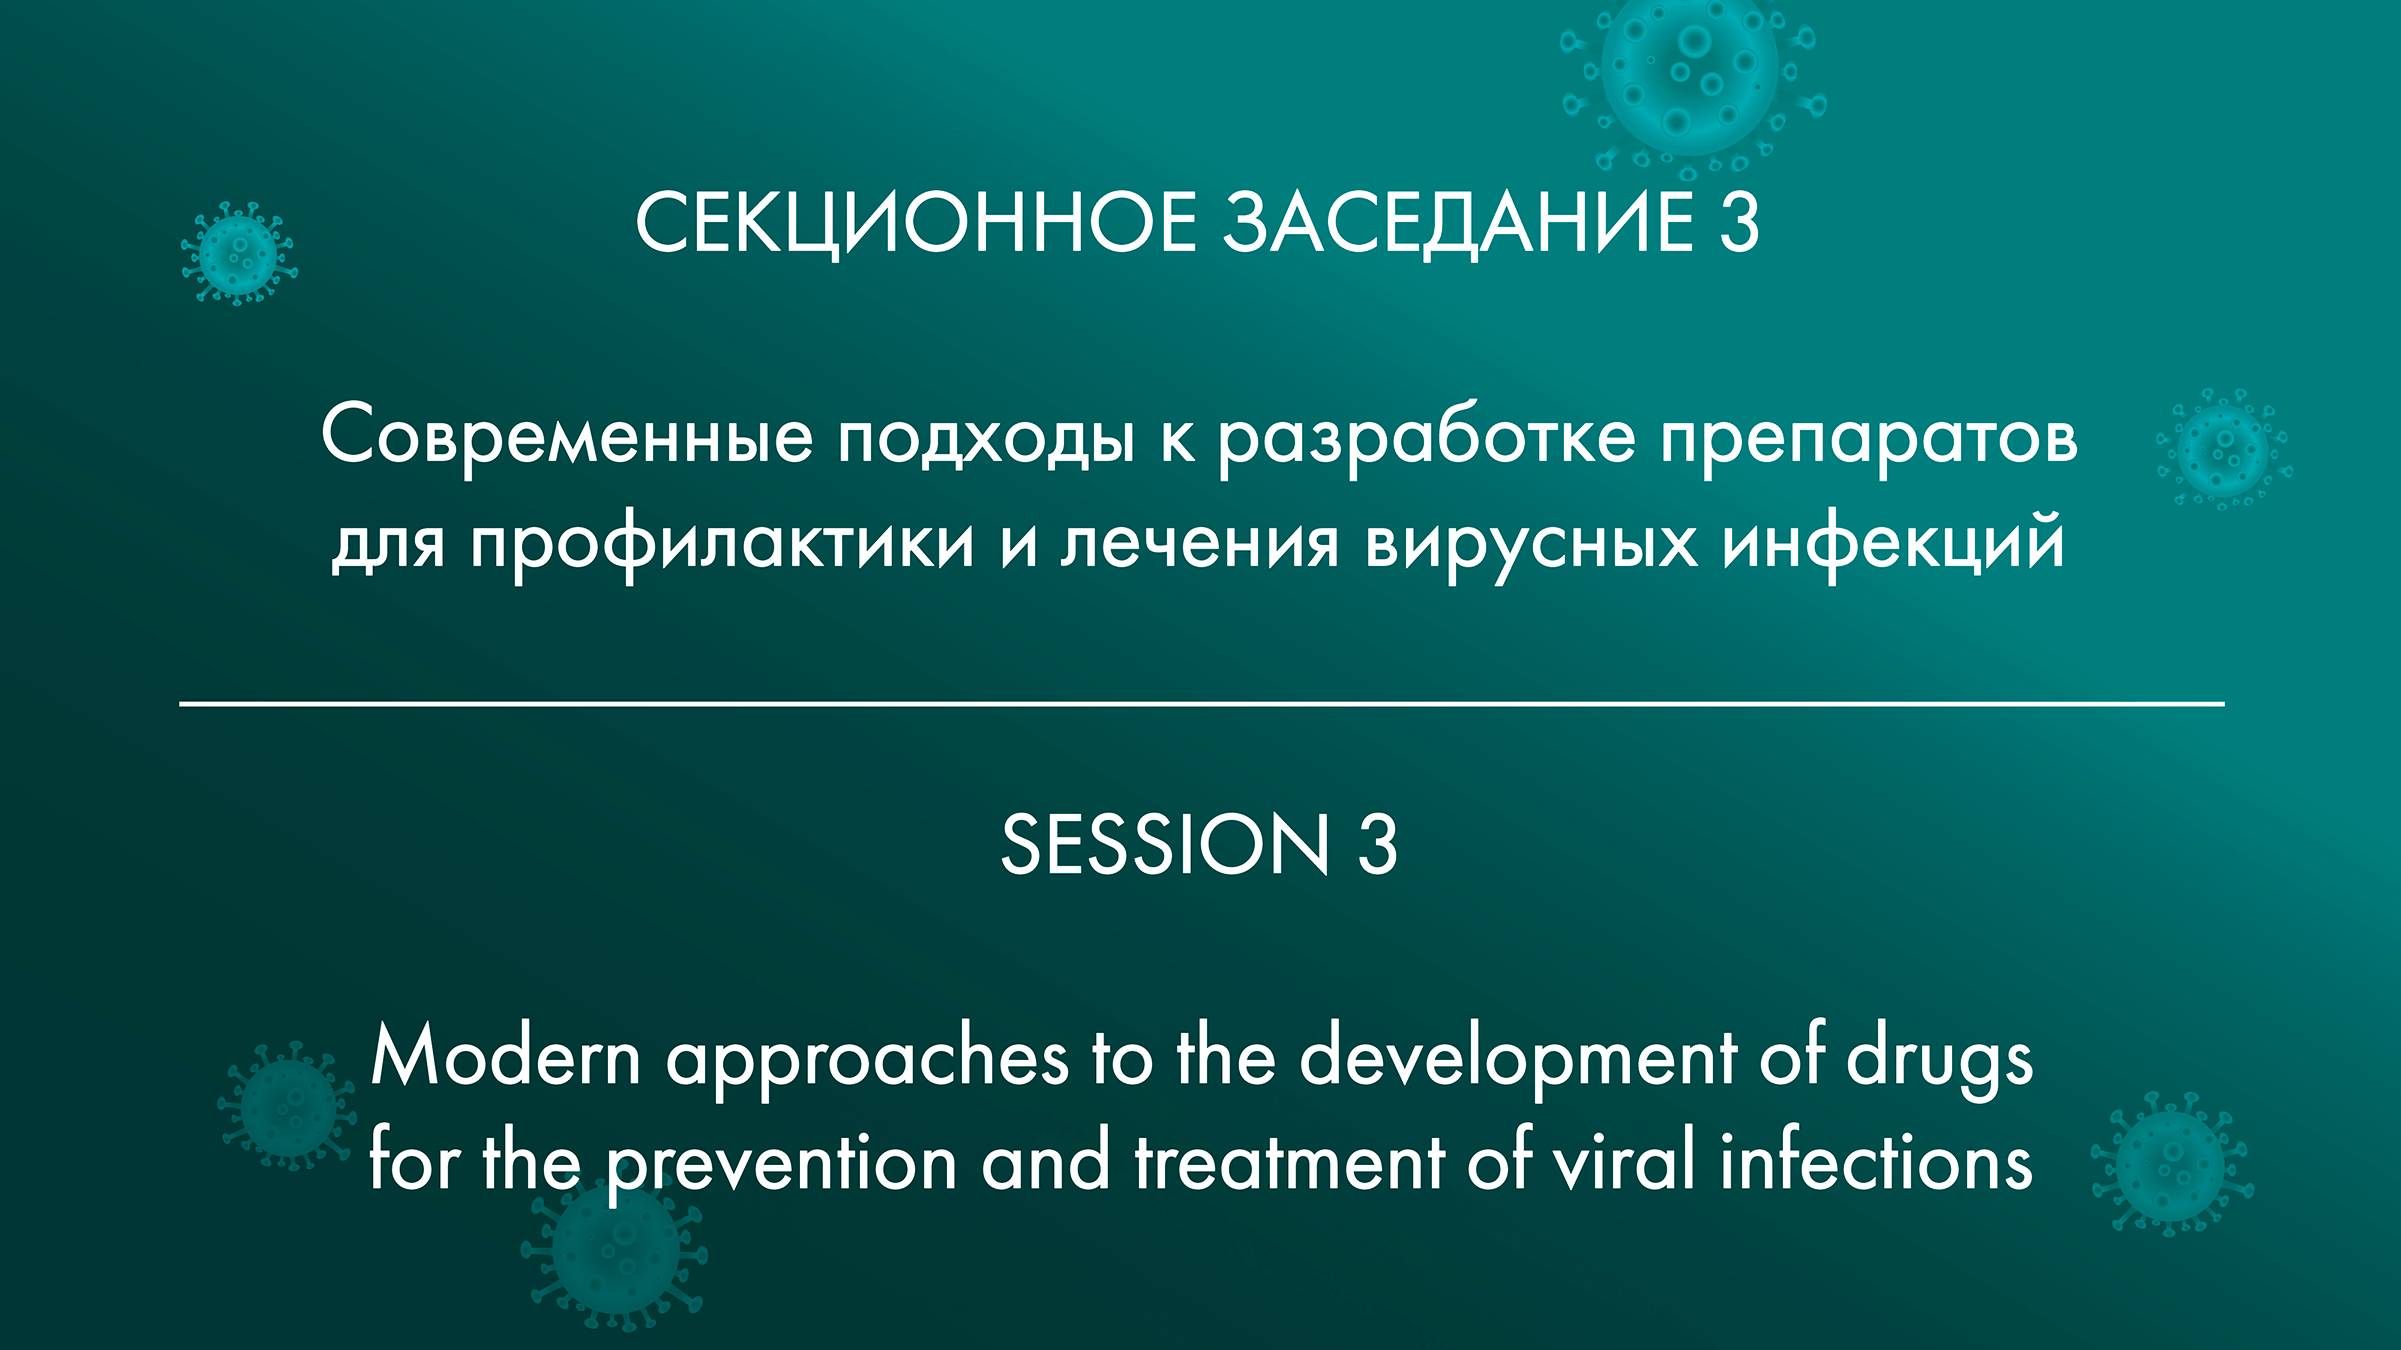 SESSION 3 Modern approaches to the development of drugs for the prevention and treatment